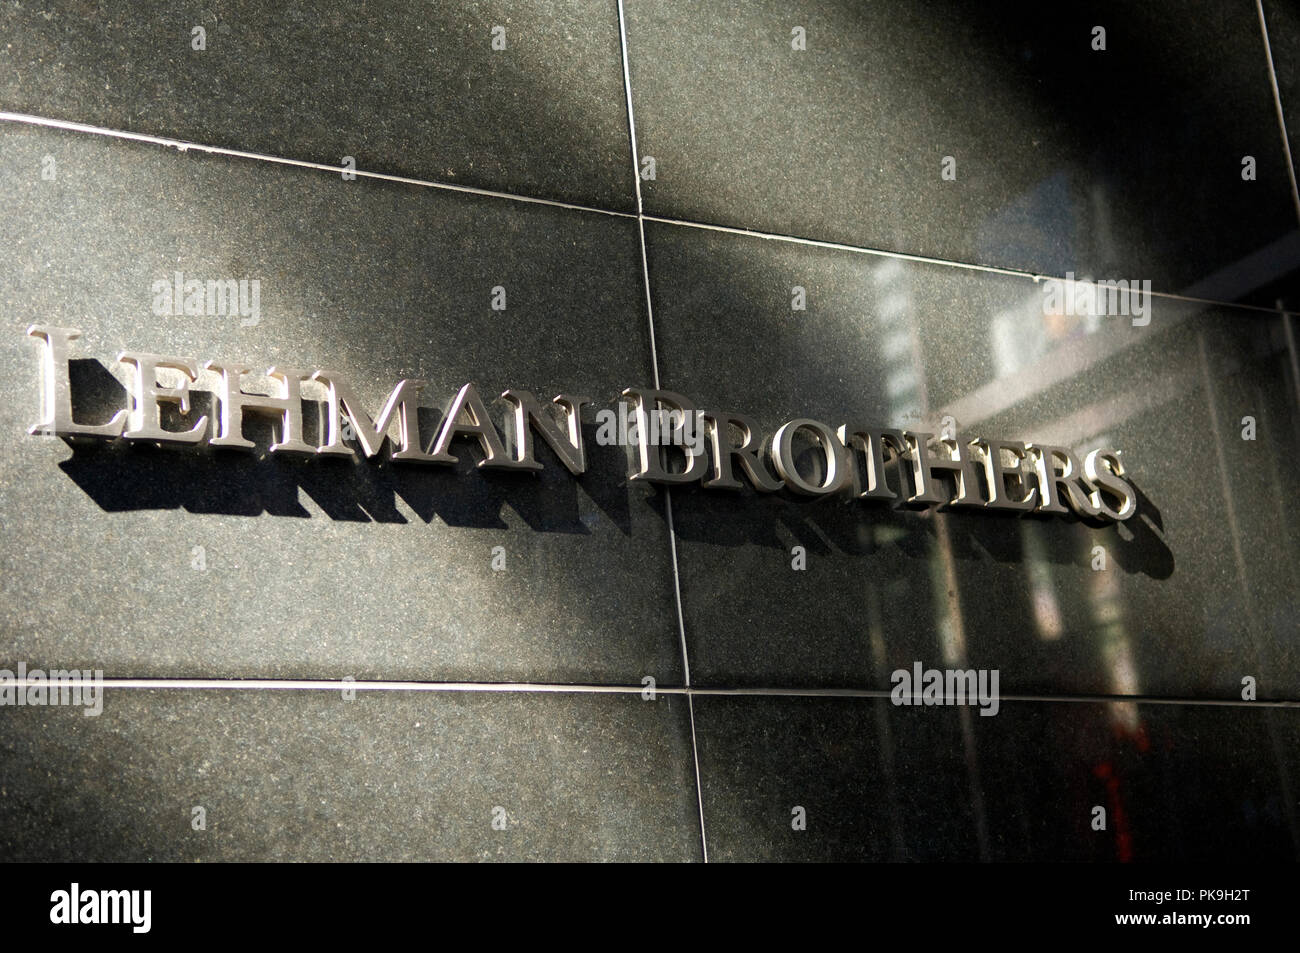 Lehman Brothers Global headquarters in New York on Monday, September 15, 2008. Lehman filed for bankruptcy protection and is one of the biggest investment banks to collapse since the 1990 bankruptcy of Drexel Burnham Lambert during the junk bond crisis. (Â© Frances M. Roberts) Stock Photo